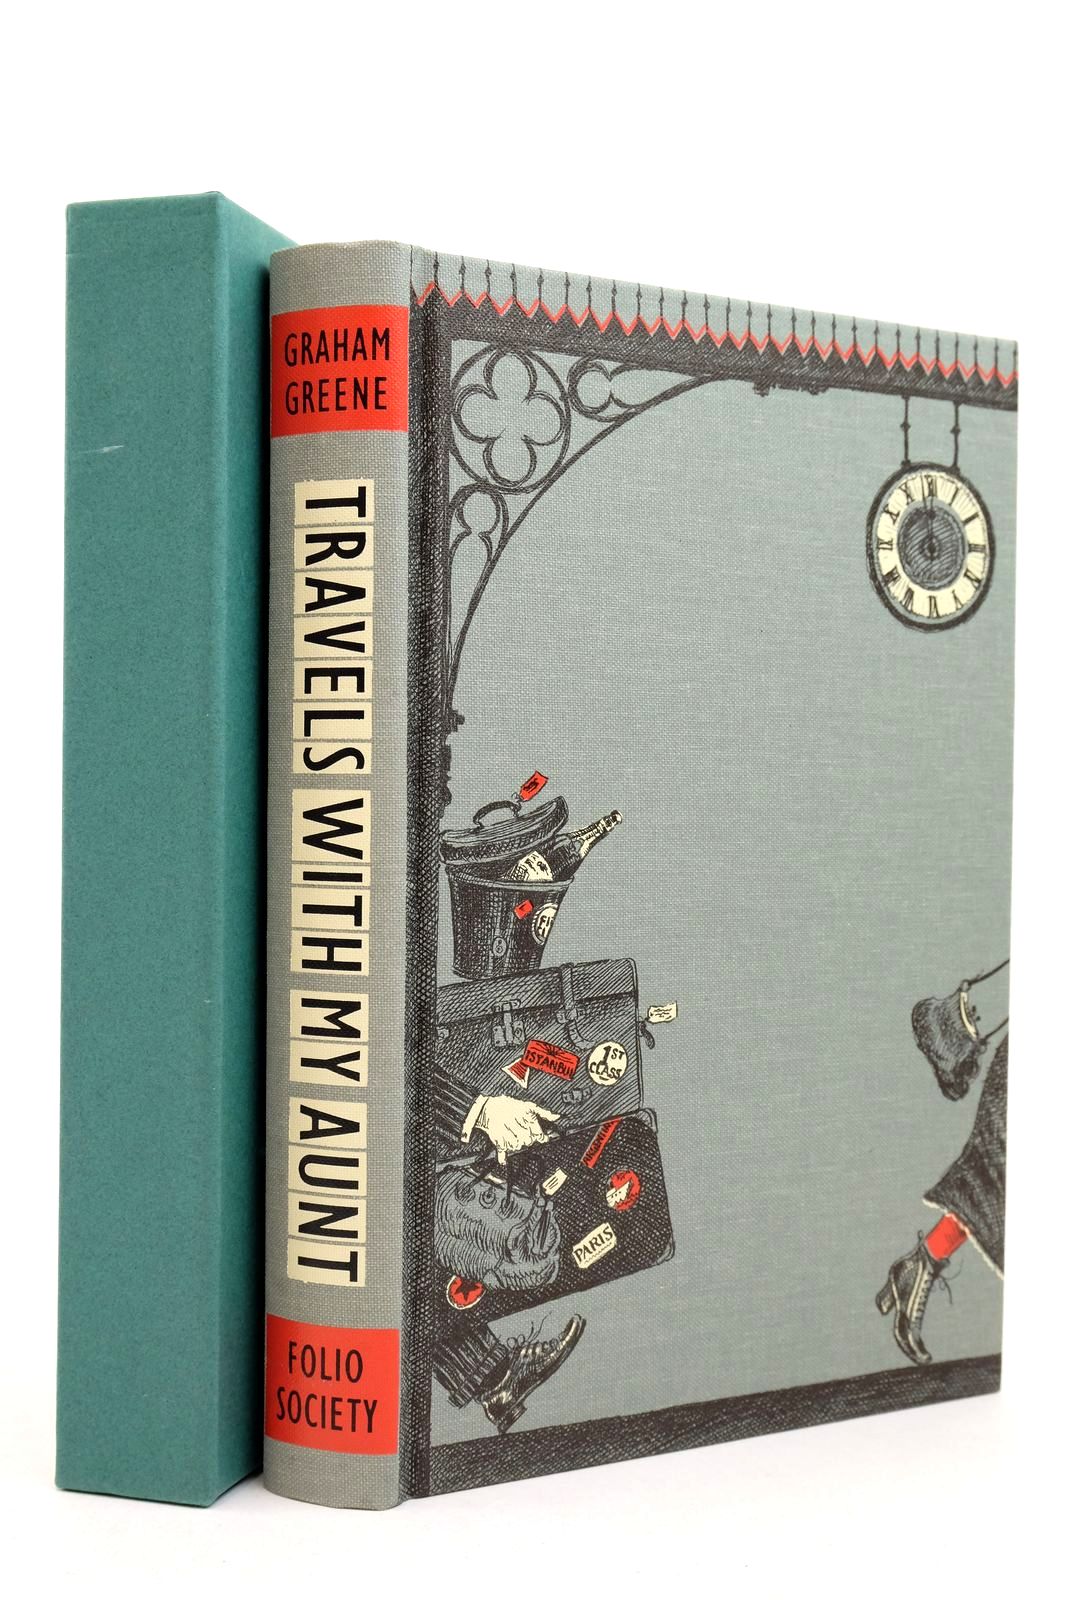 Photo of TRAVELS WITH MY AUNT: A NOVEL written by Greene, Graham Mortimer, John illustrated by Holder, John published by Folio Society (STOCK CODE: 2140252)  for sale by Stella & Rose's Books